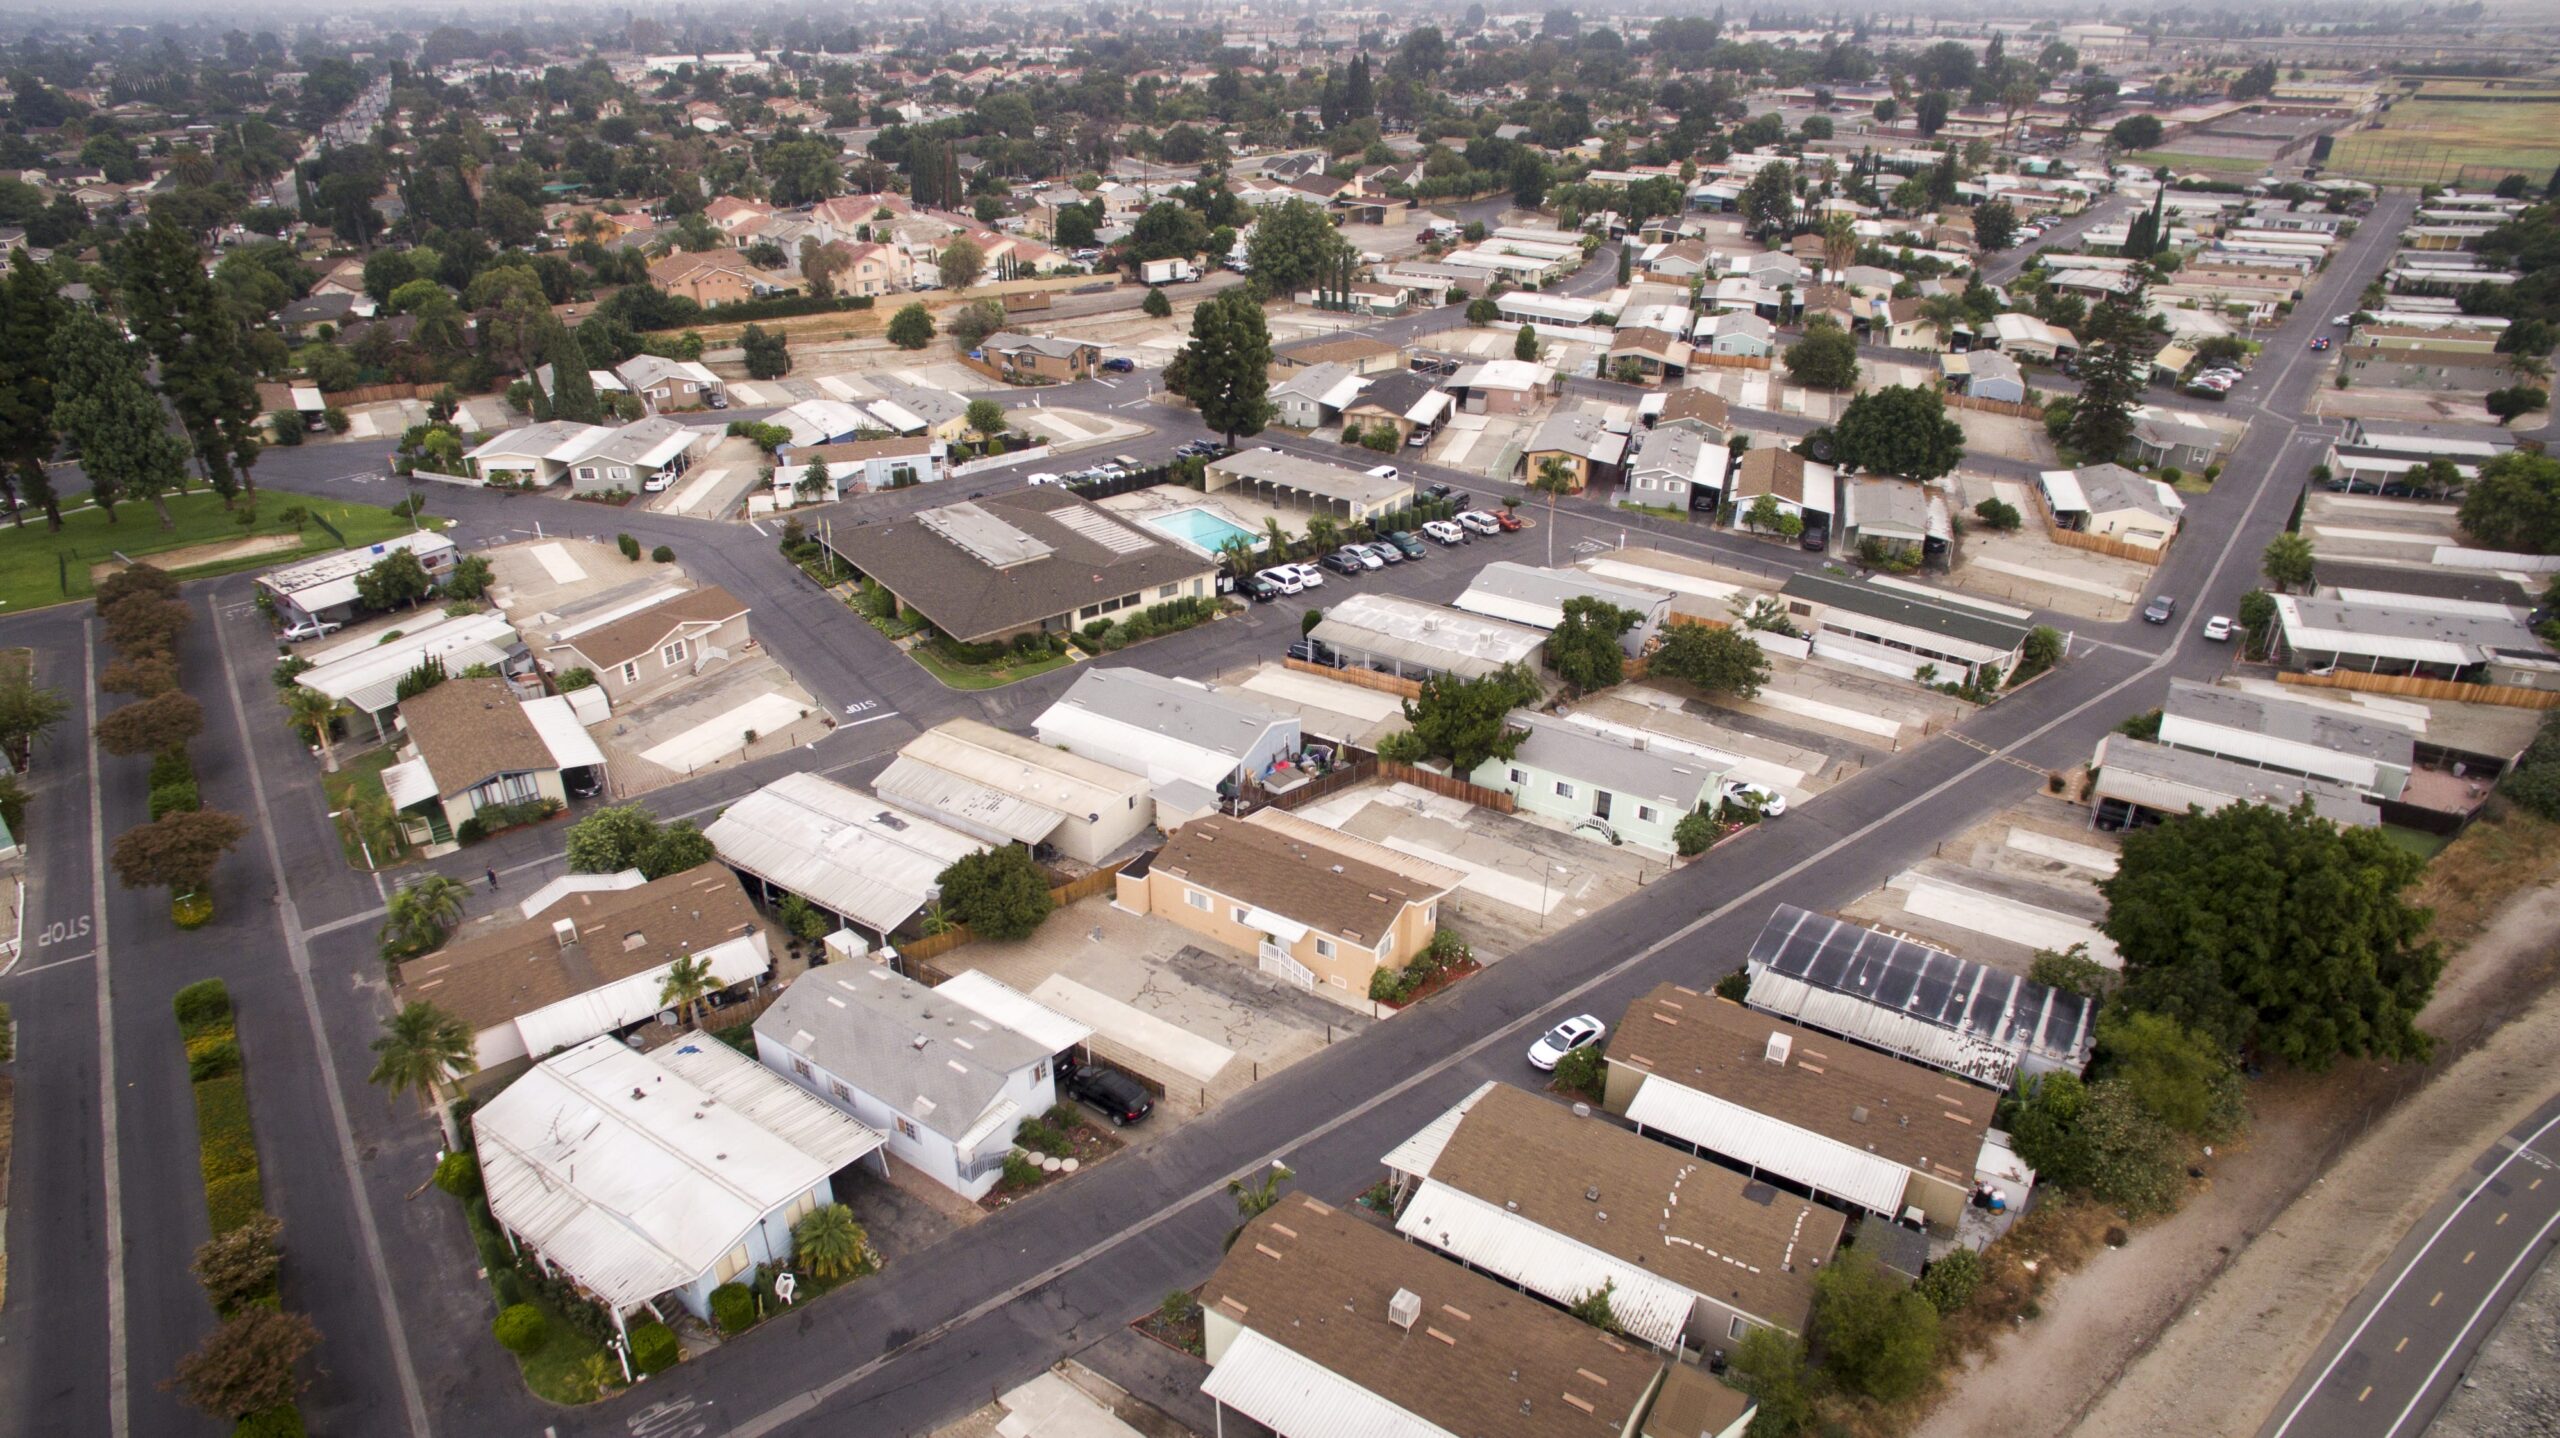 Shopoff Realty Investments Sells 45-acre Manufactured Housing Community in El Monte for $72.5 Million